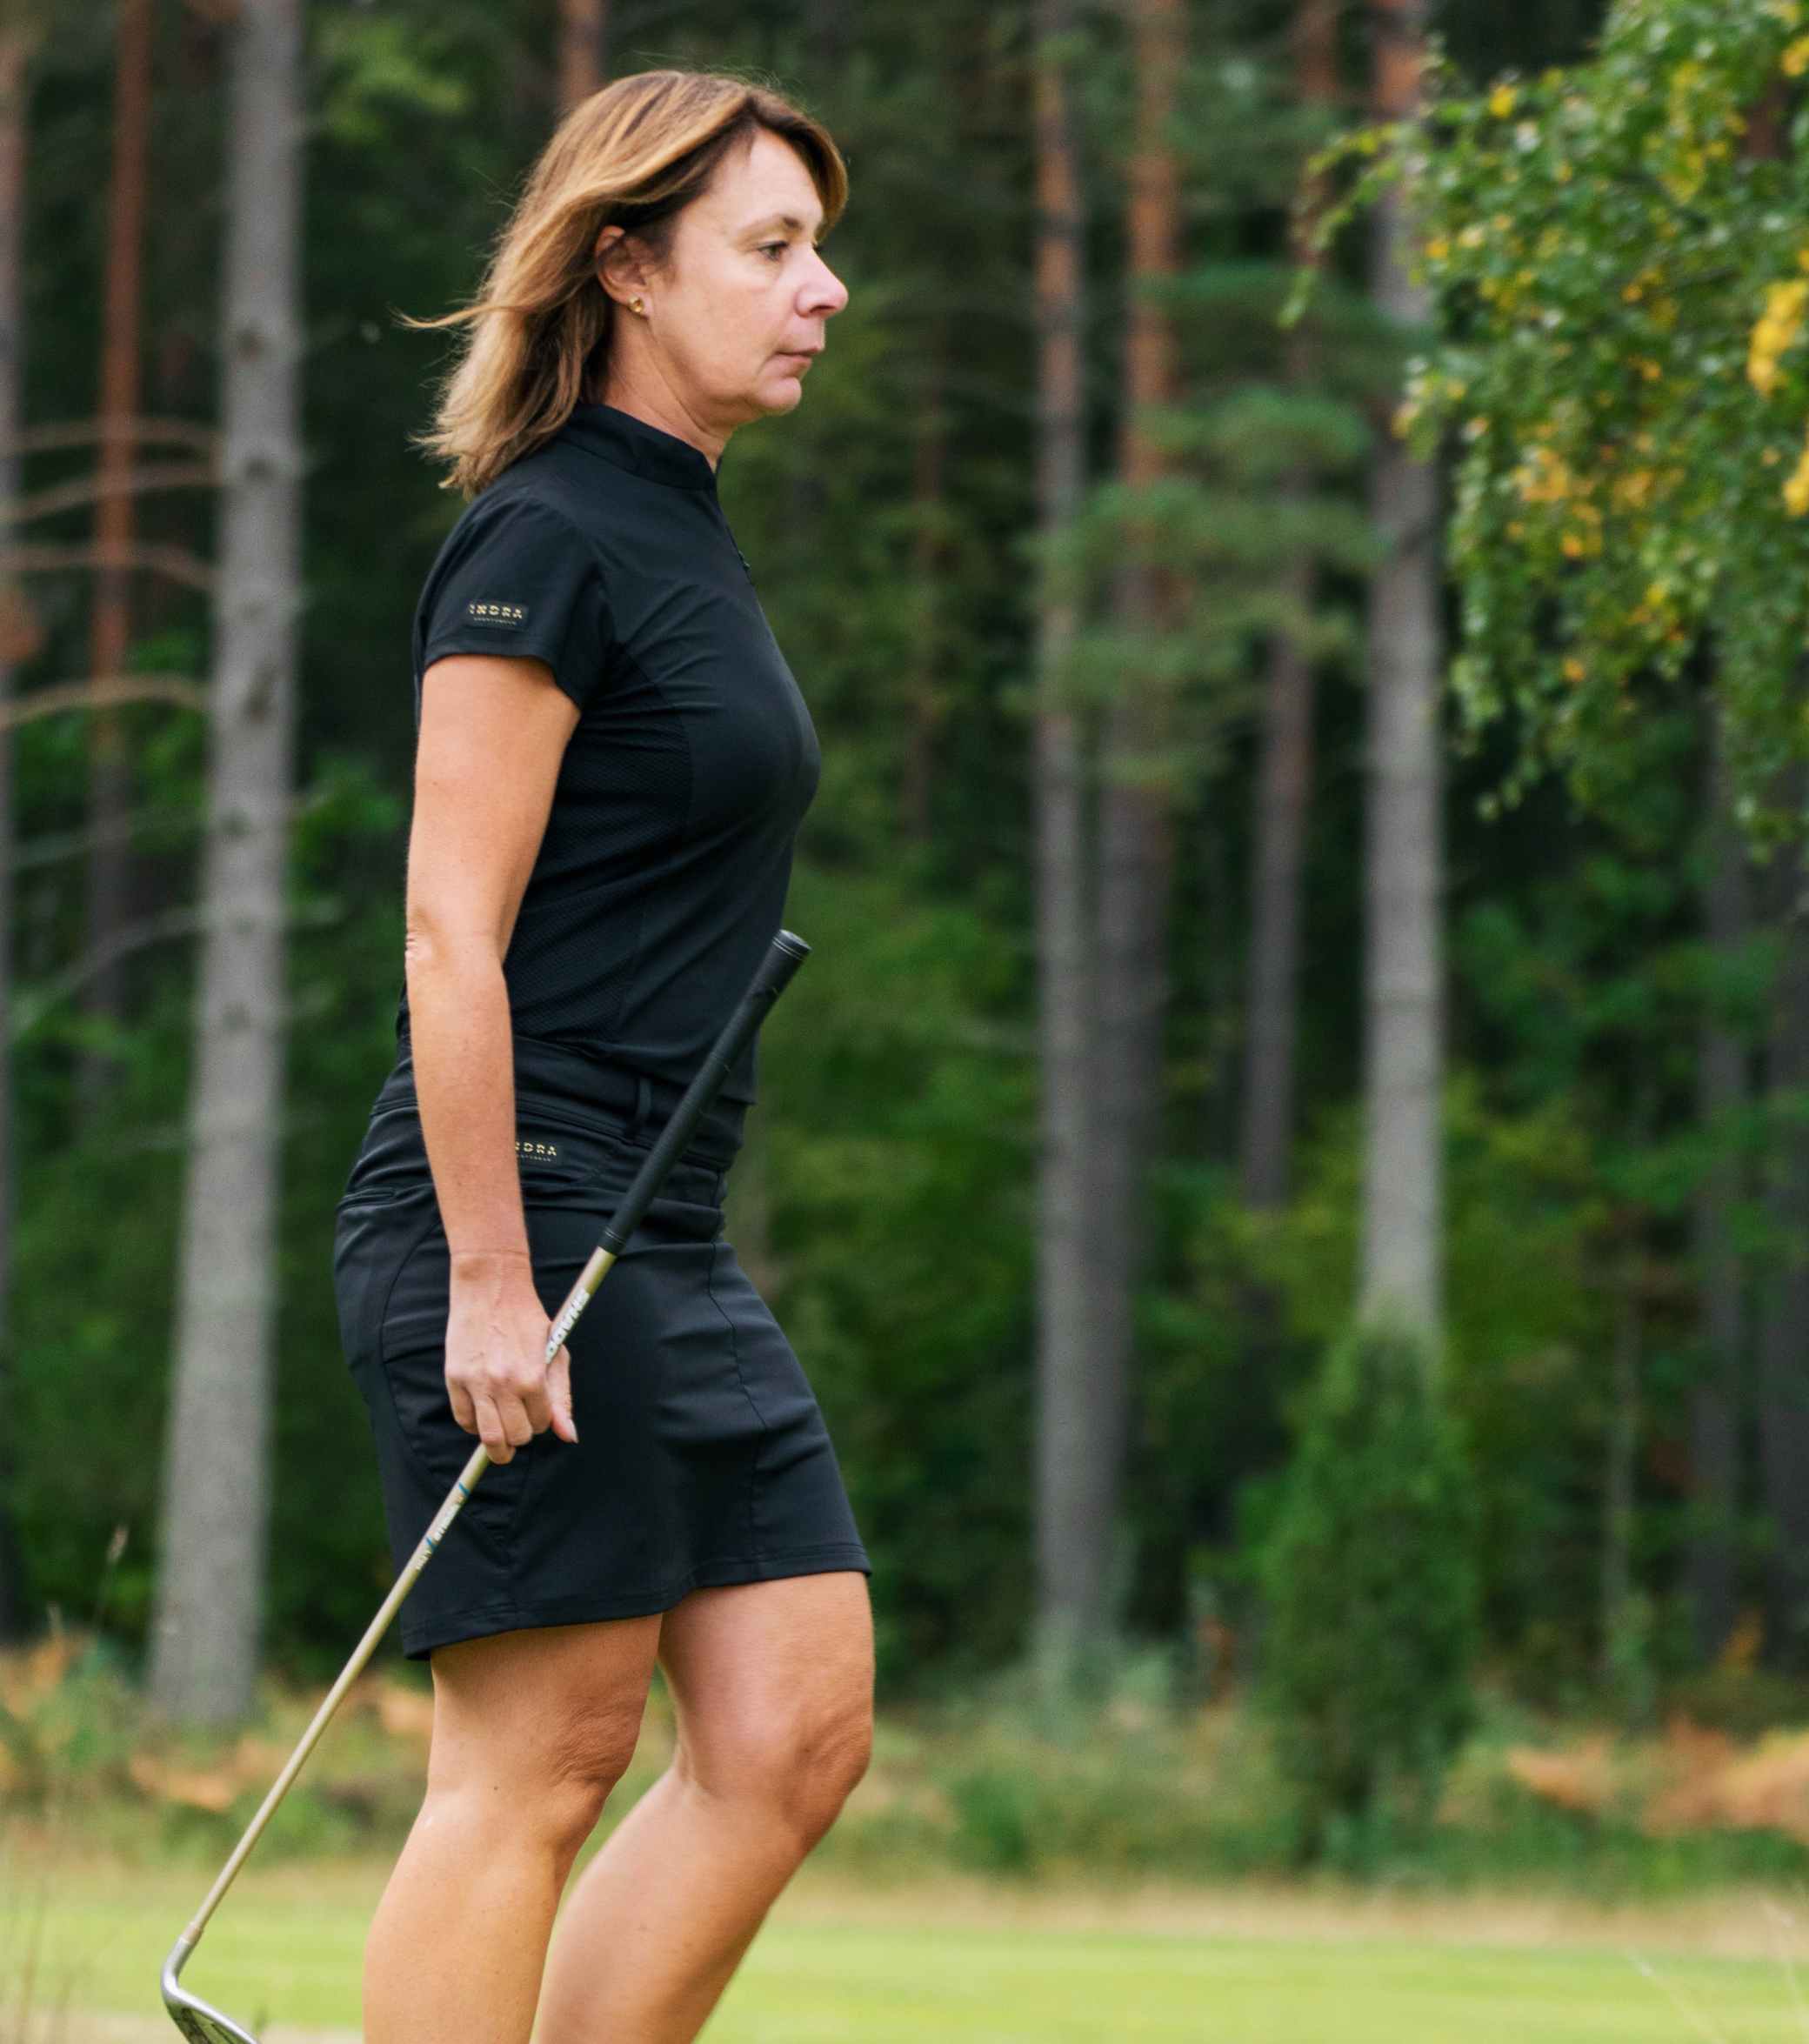 INDRA Sportswear comfortable, stylish golf clothing by women for women